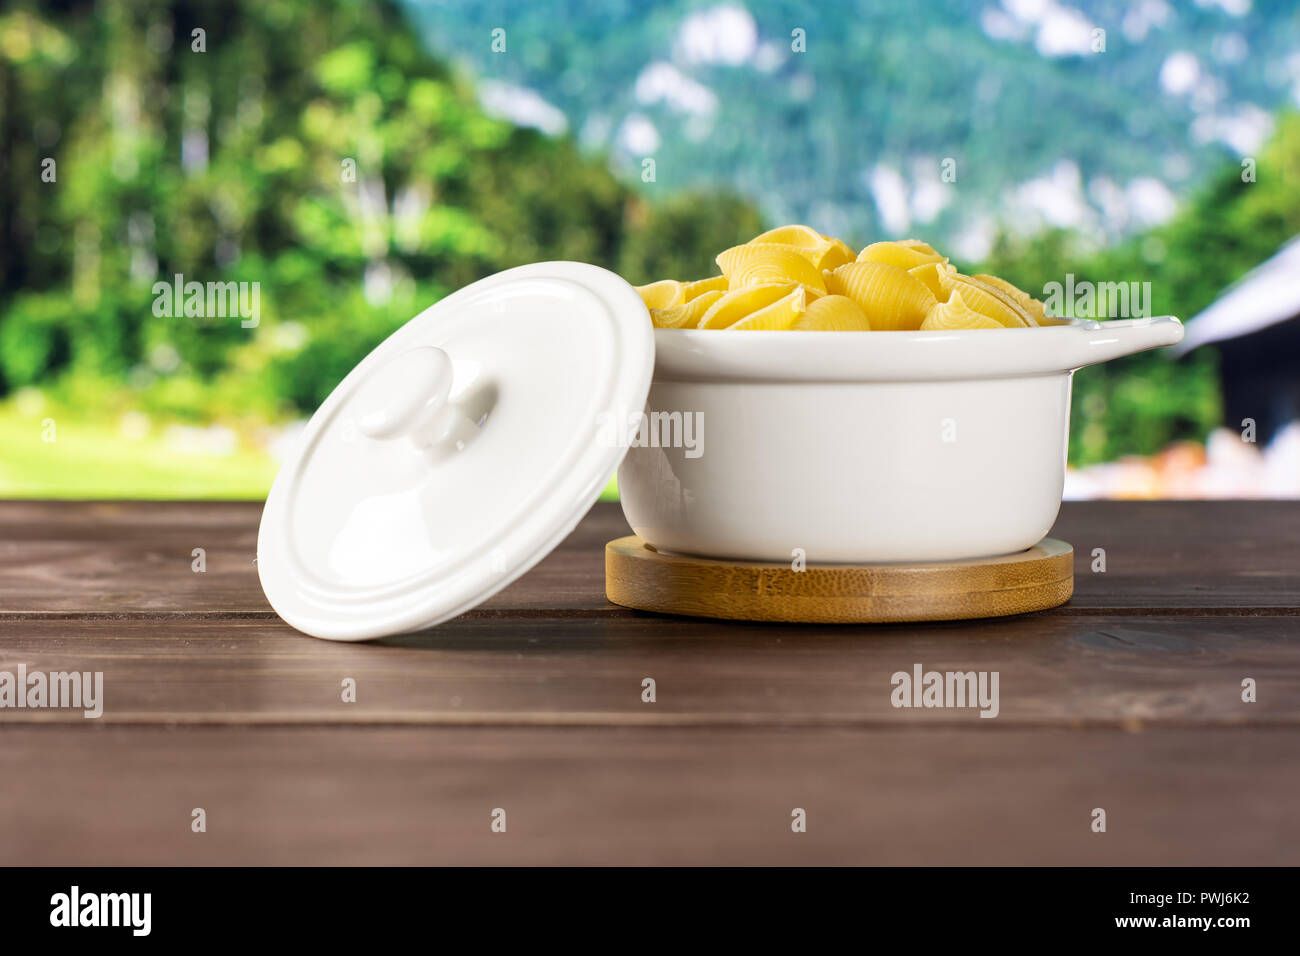 Lot of whole raw yellow pasta conchiglie variety in a ceramic stewpan with country nature in background Stock Photo